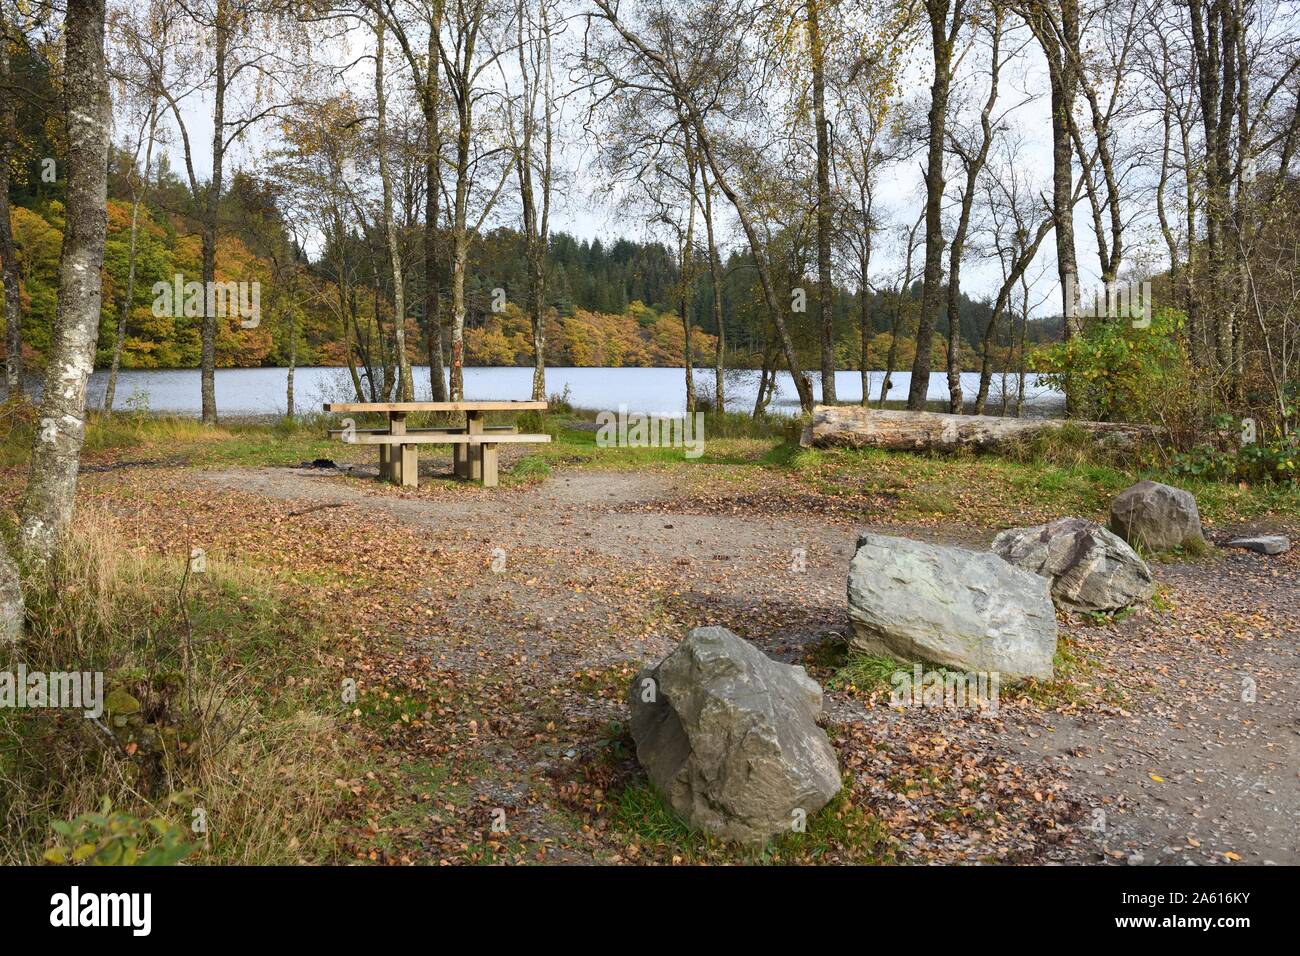 A picnic area on the shore of Loch Drunkie on the Three Lochs forest drive in the Trossachs area of Scotland, UK, Europe Stock Photo